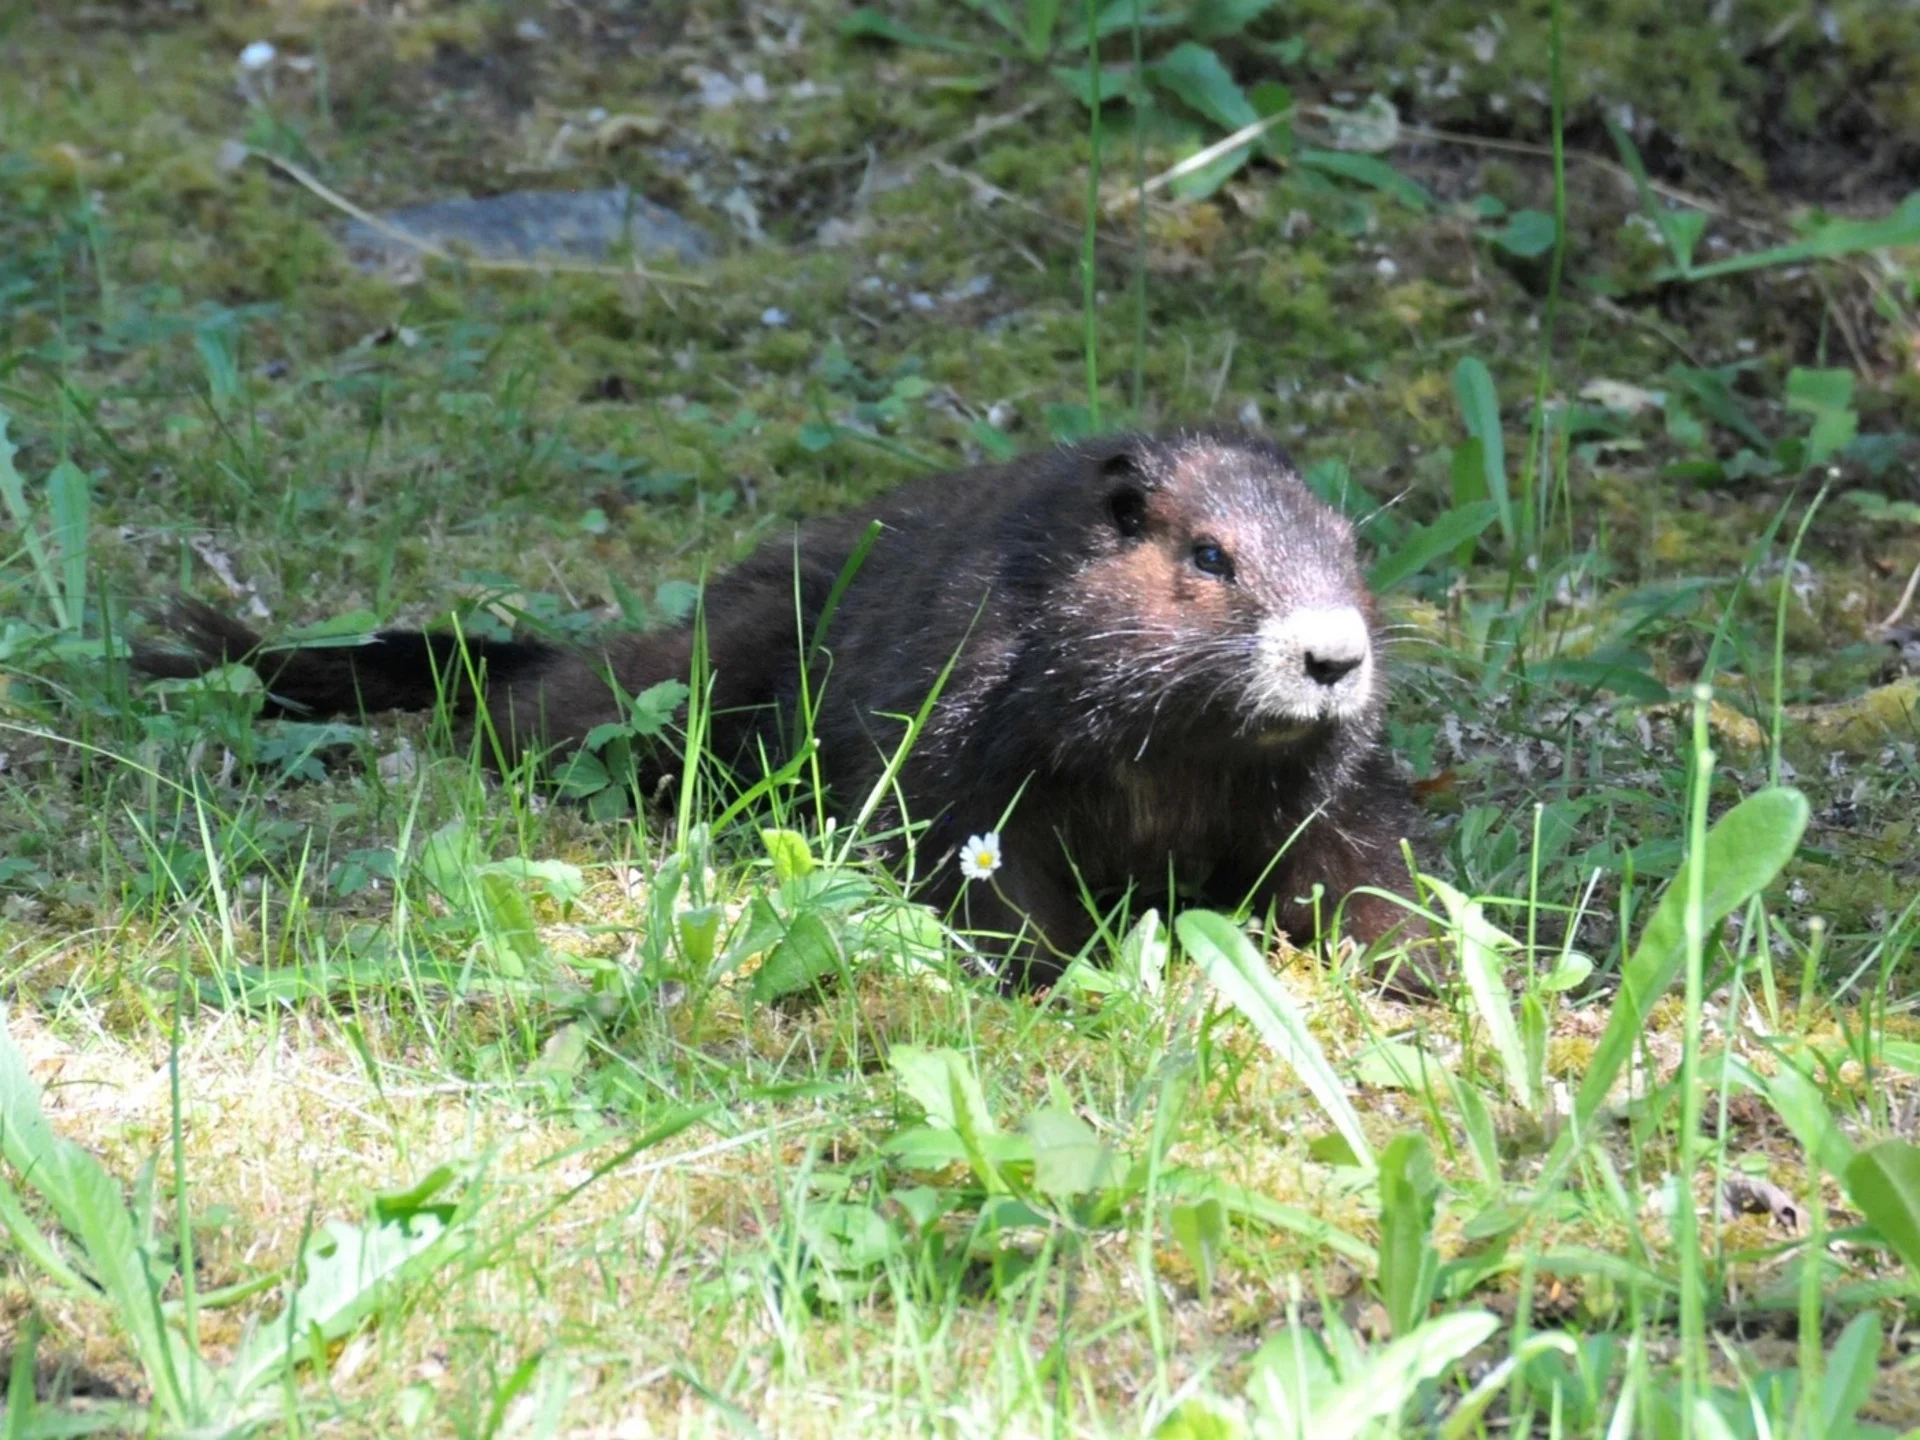 Great news: Canada's most endangered animal is making a comeback